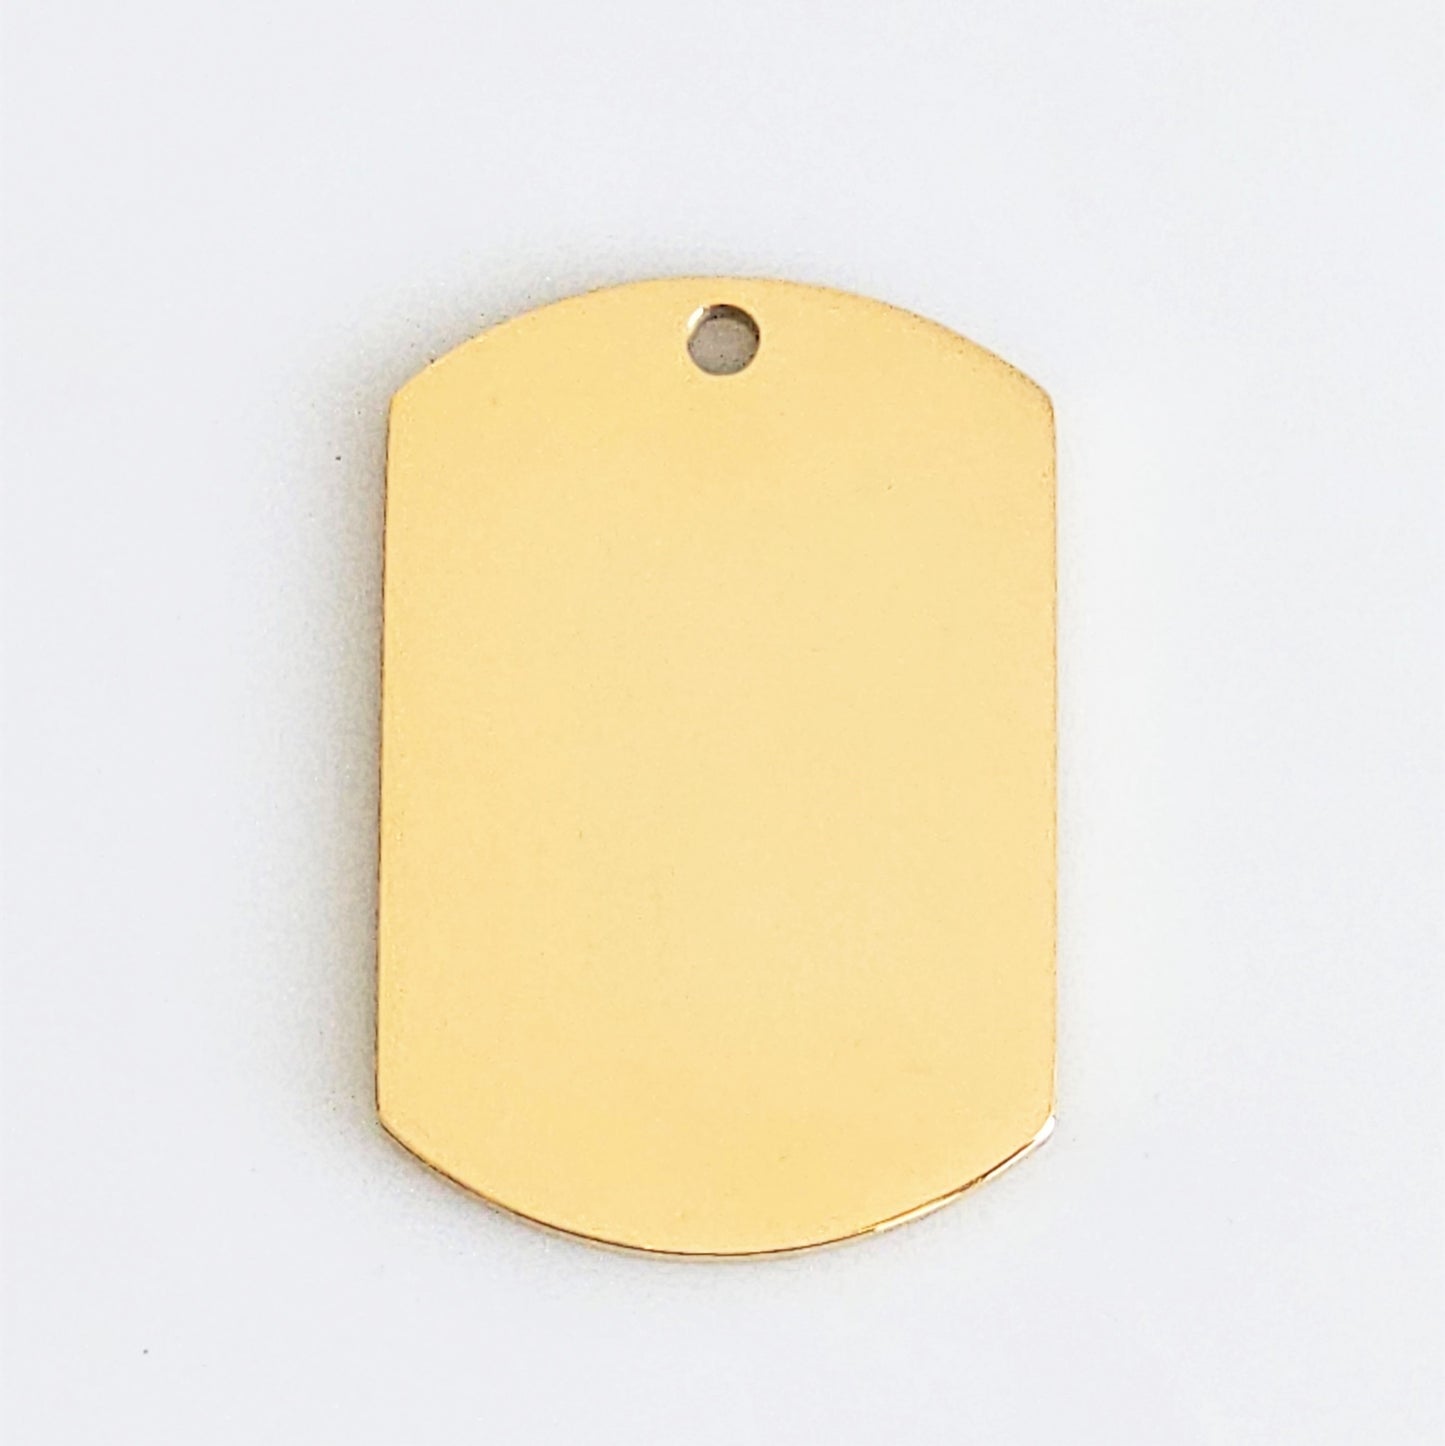 Gold Plated Stainless Steel - 3/4" x 1" Dog Tag